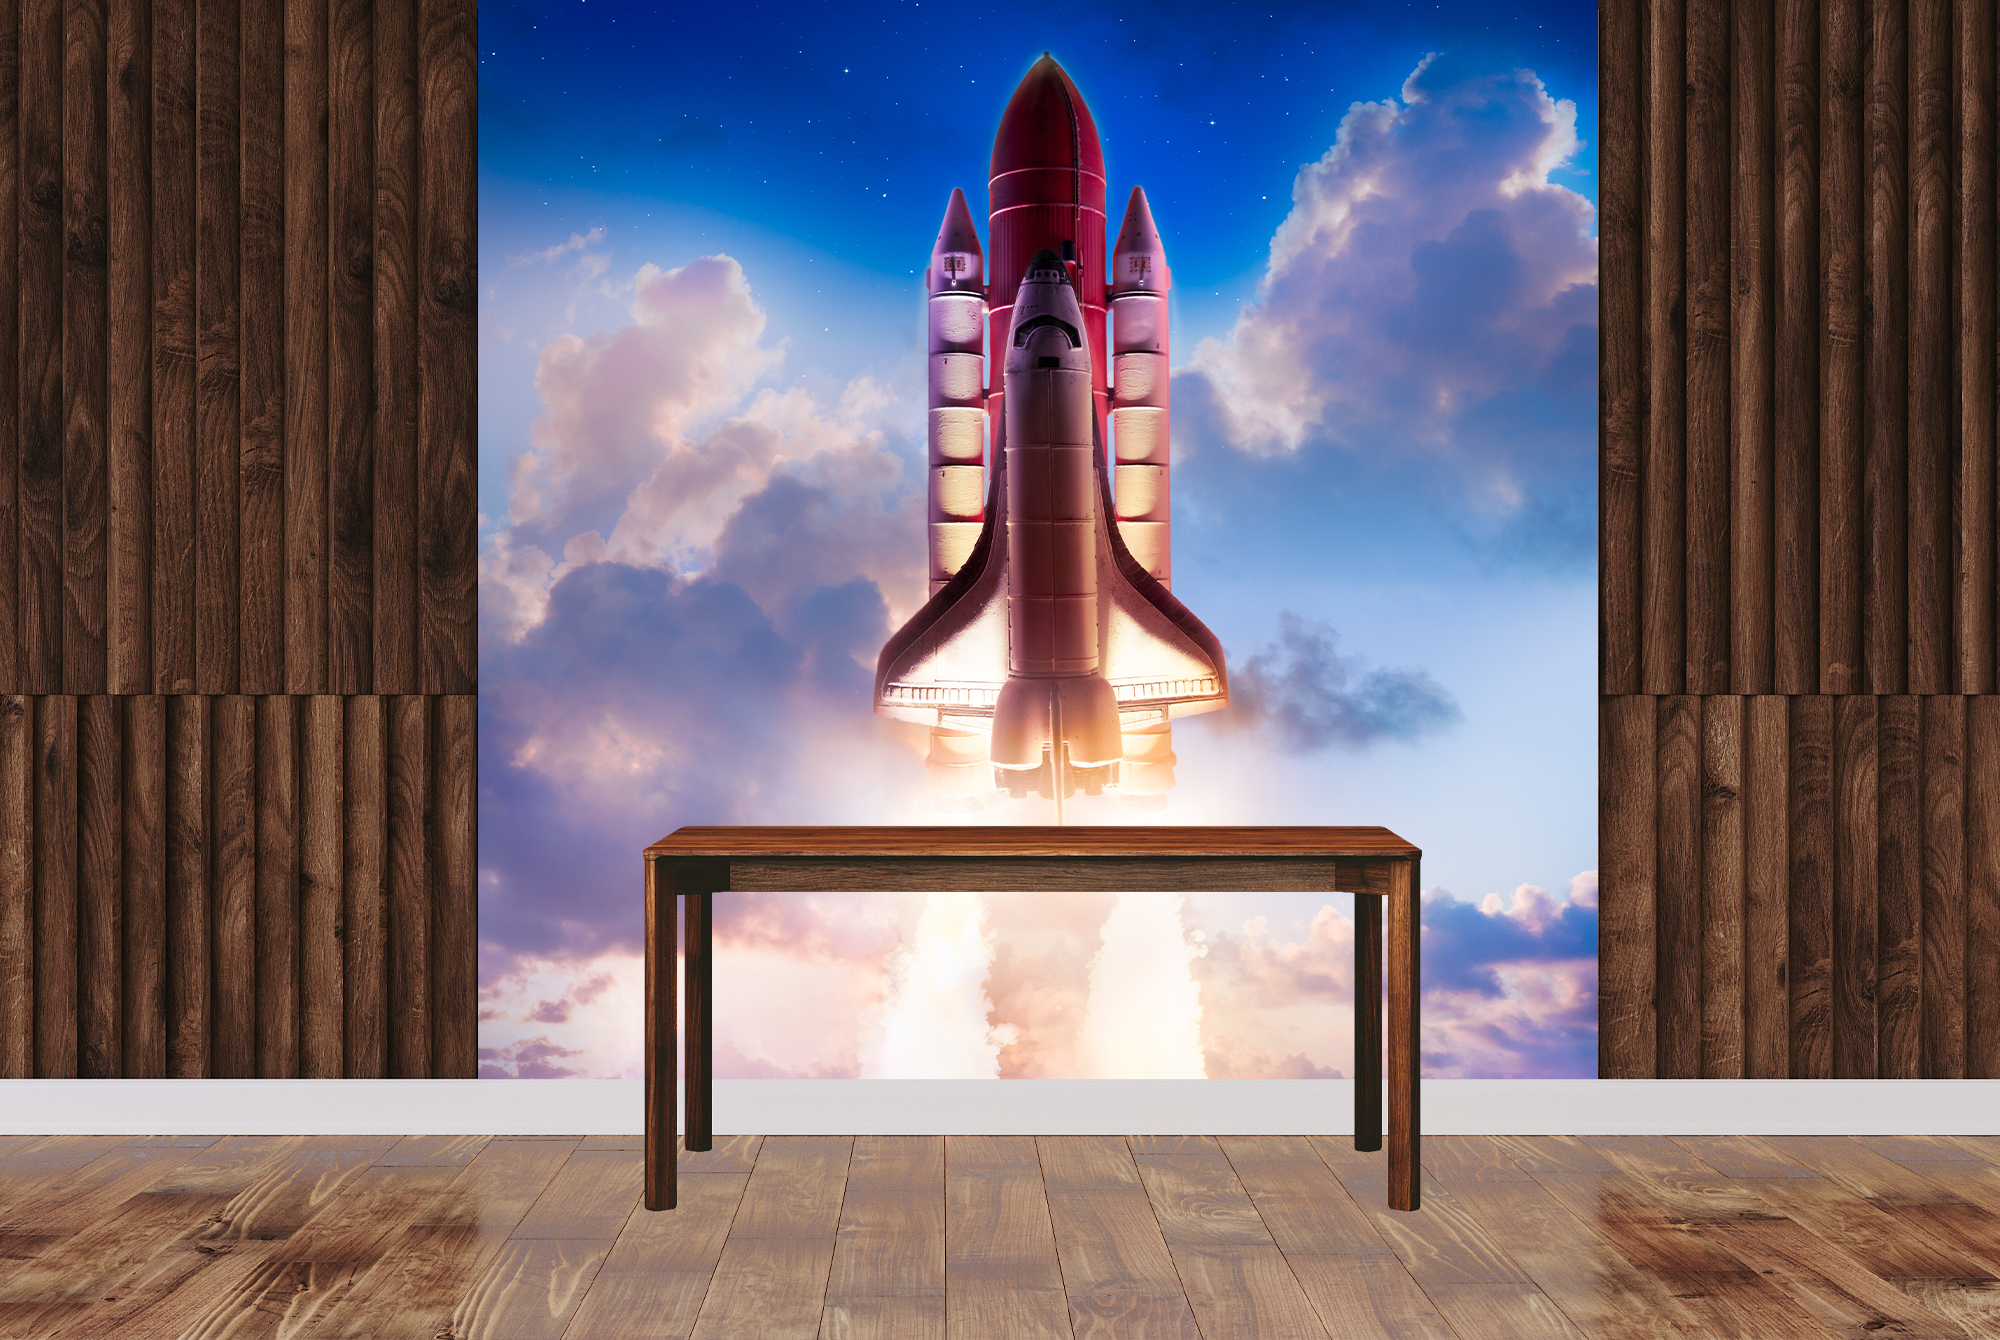 Rocket Space Ship Launch Outer Space Science Wall Mural Travel Photo Wallpaper